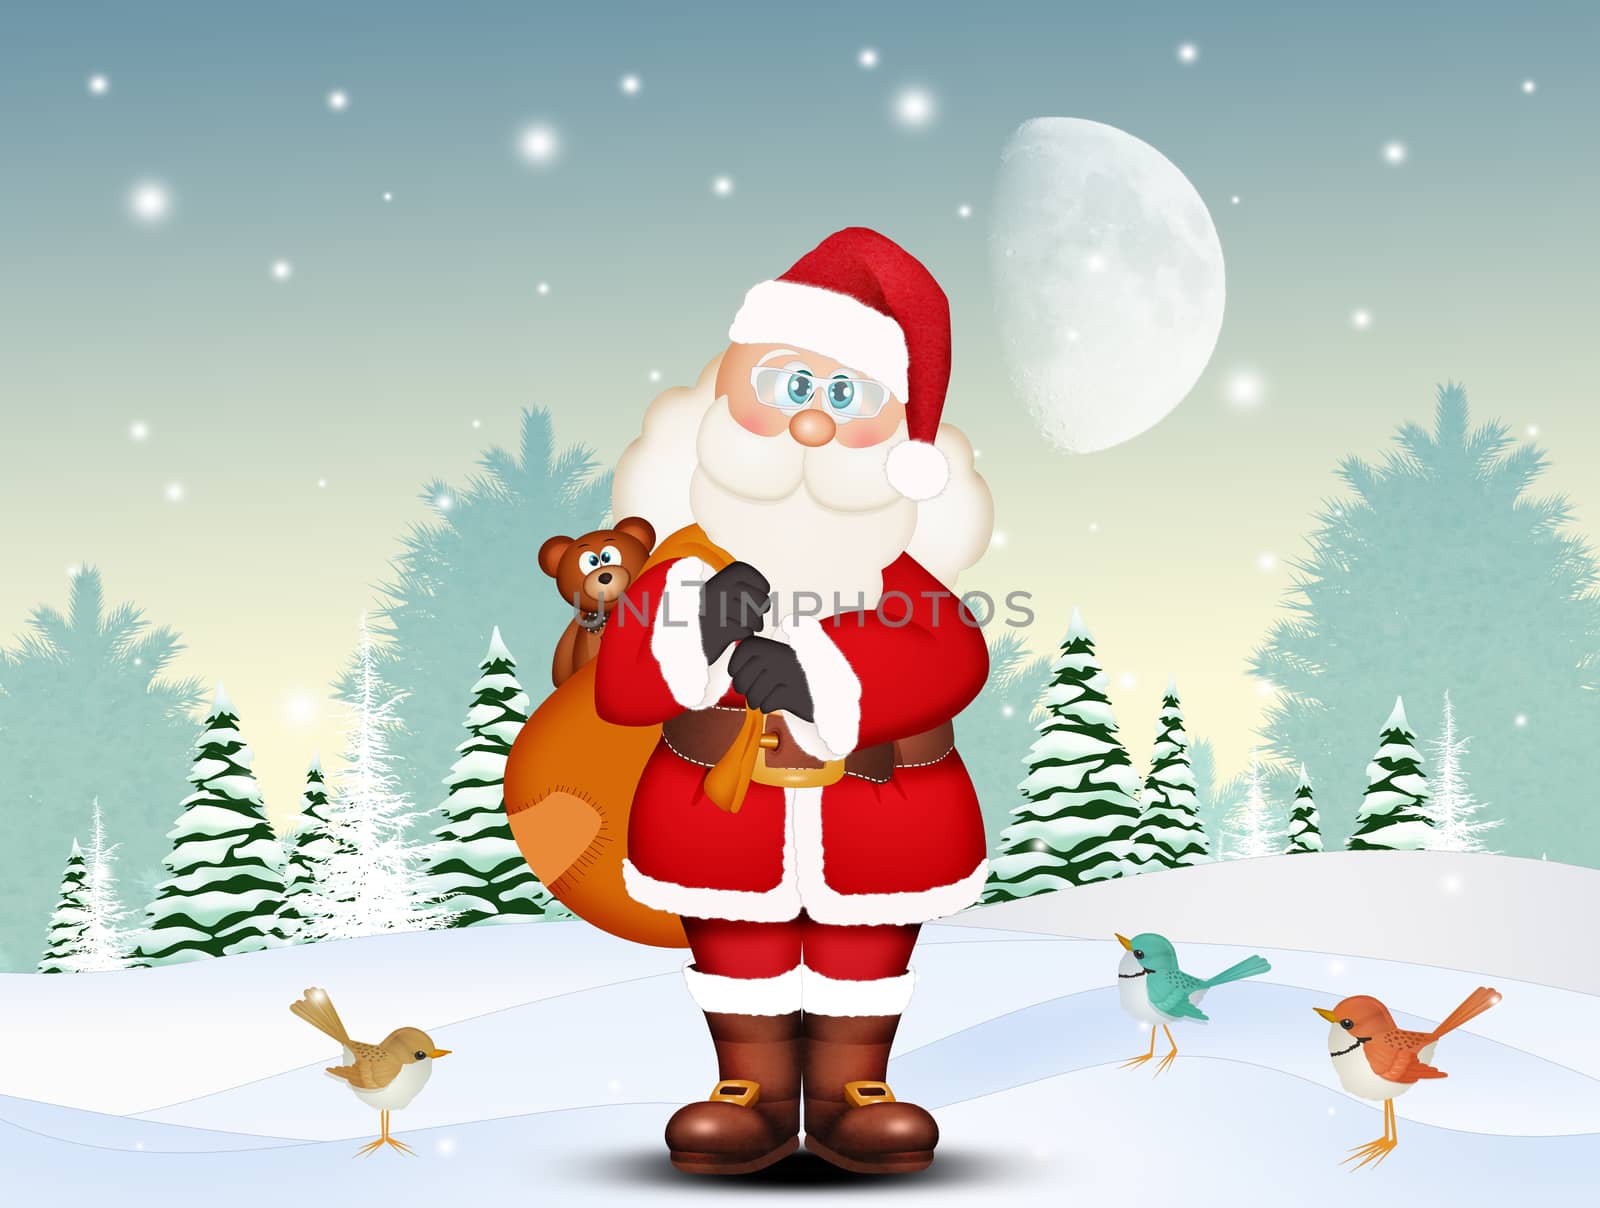 illustration of Santa Claus with sack of present